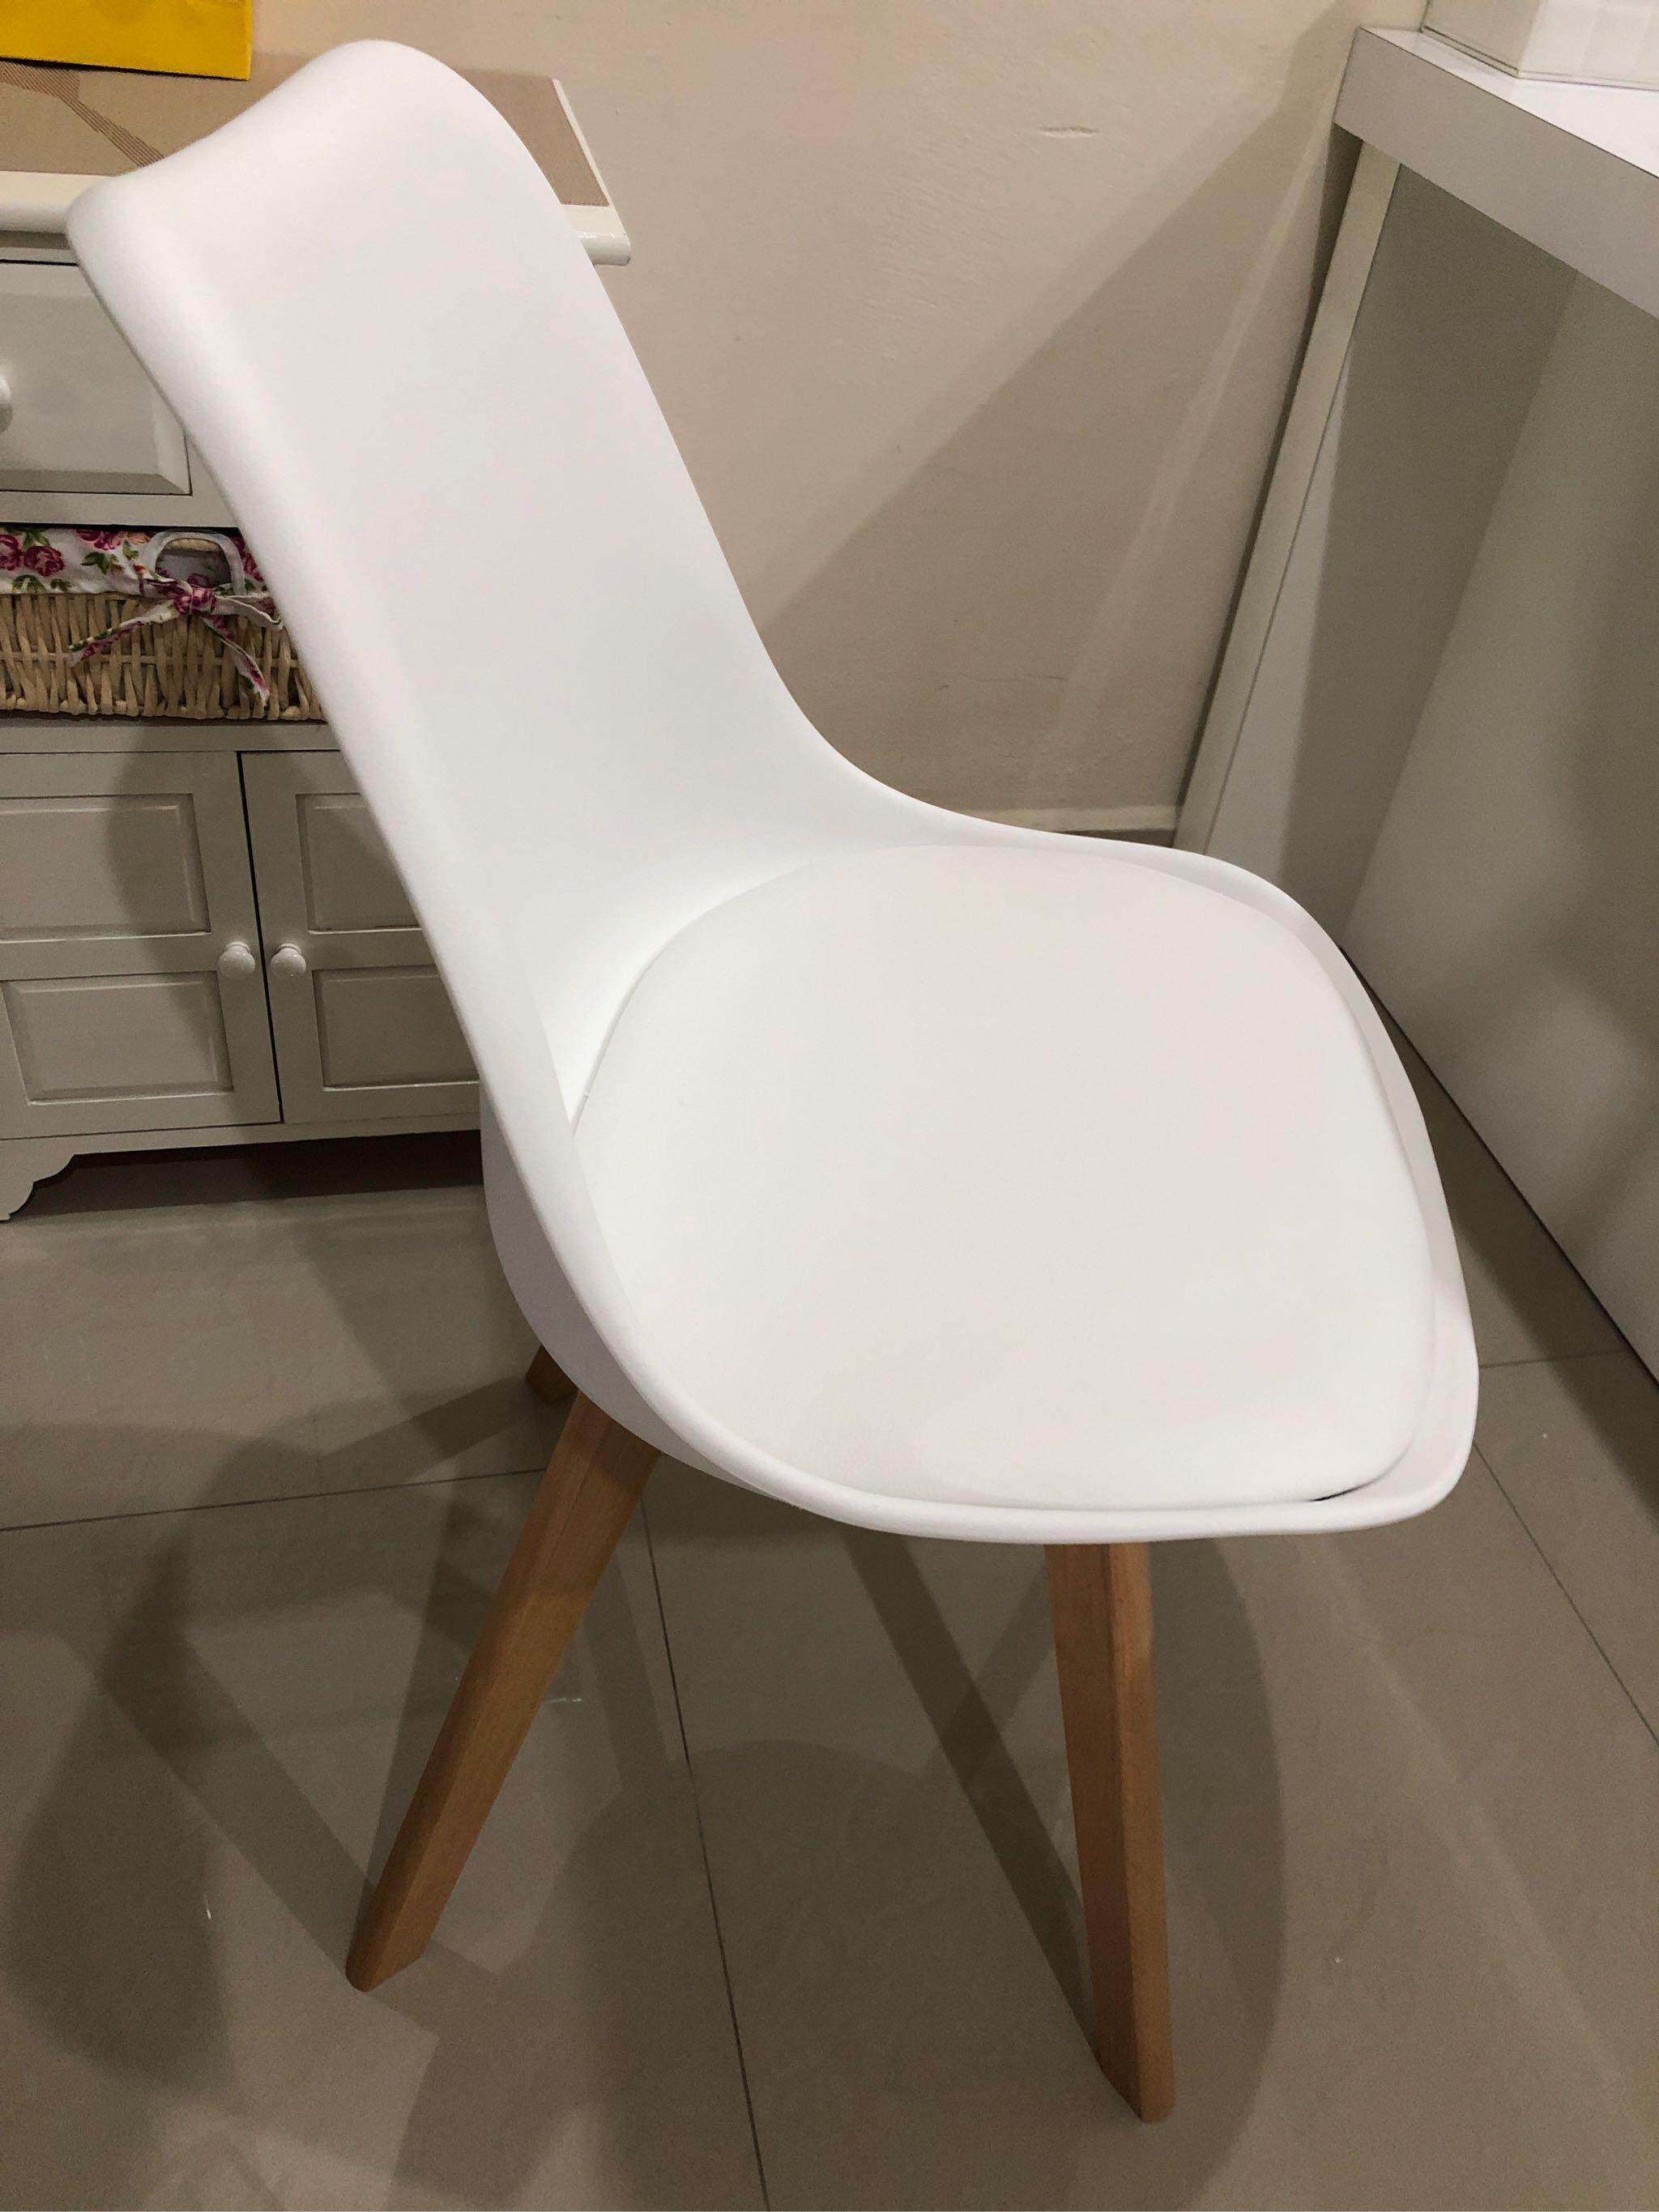 EAMES CHAIR WITH PU SEAT